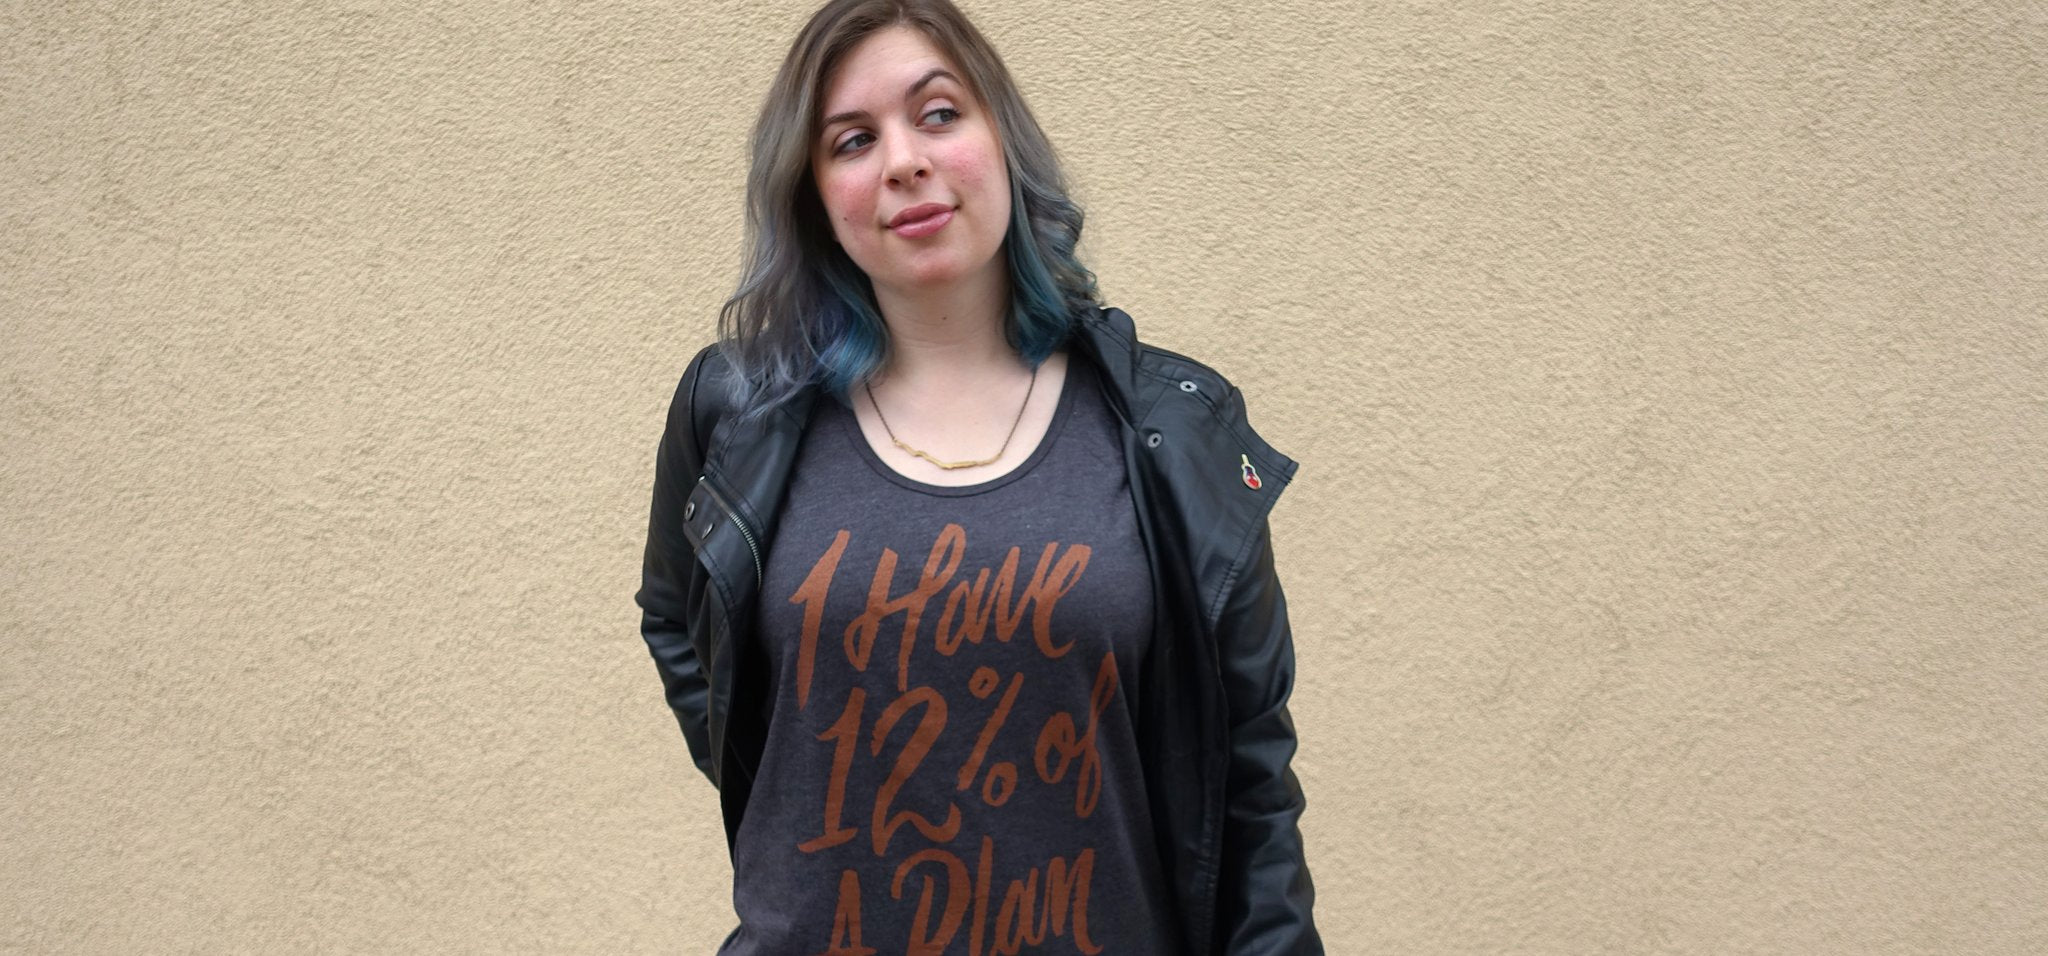 May's Shirt of the Month | I Have 12% of a Plan